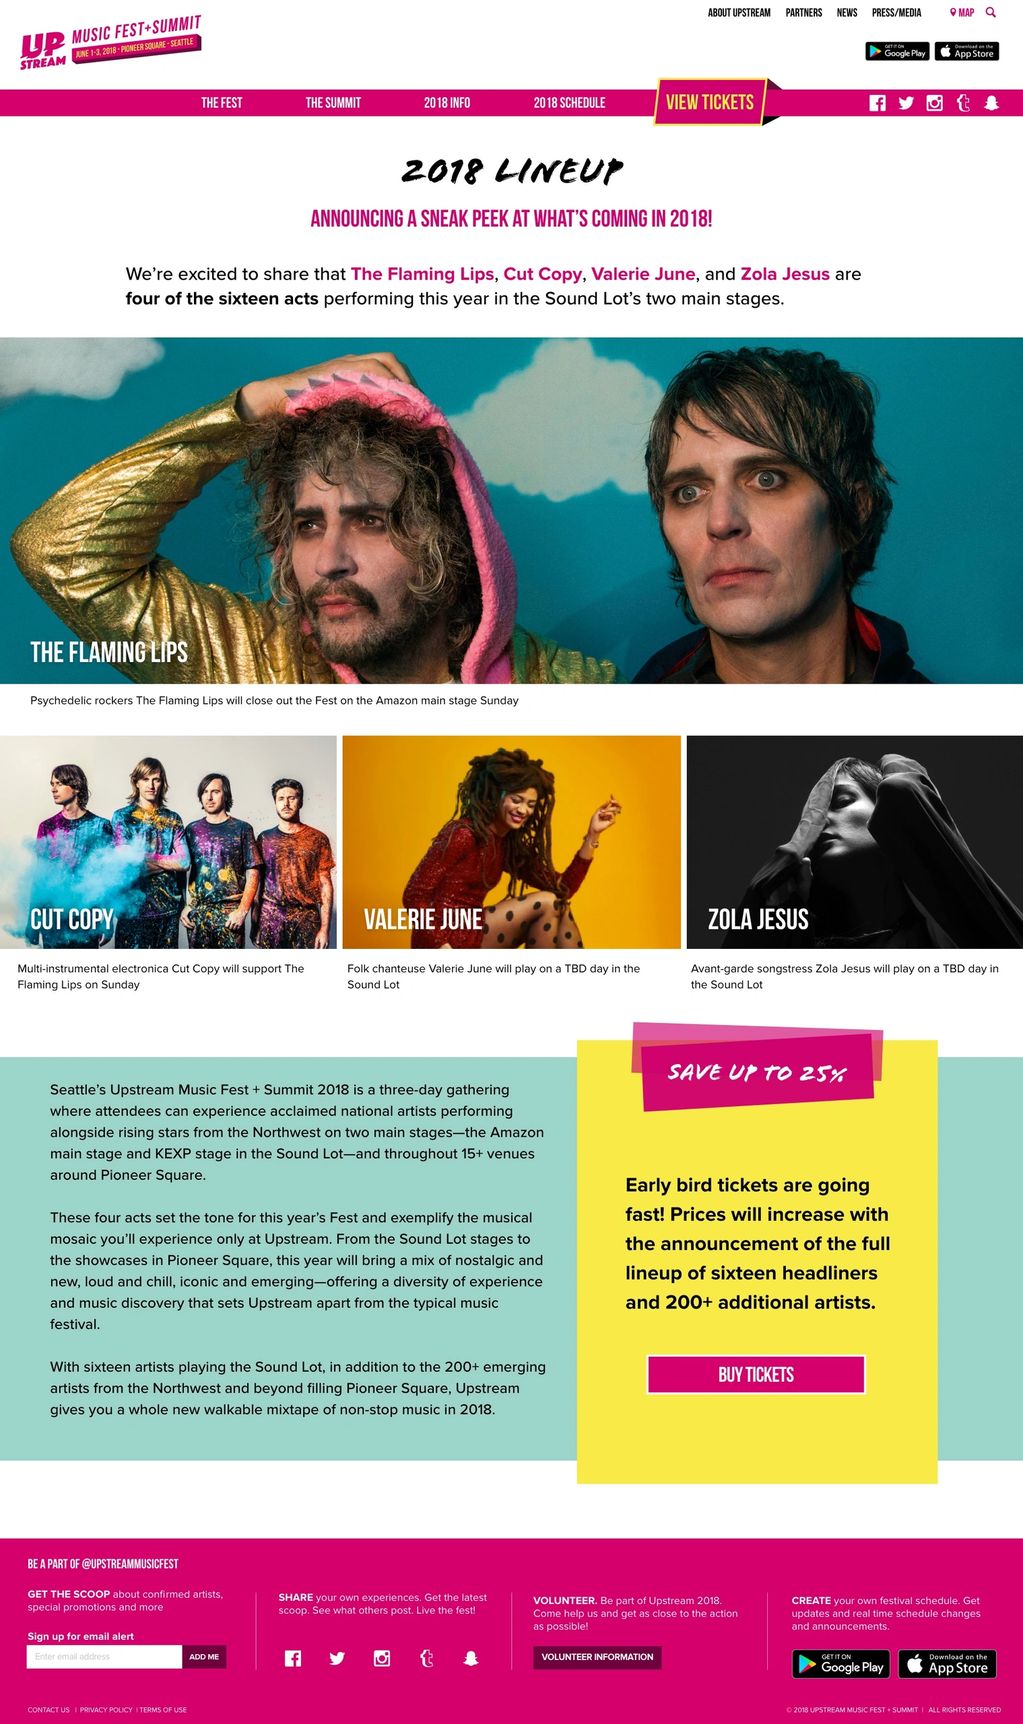 2018 Upstream lineup. It includes The Flaming Lips, Cut Copy, Valerie June, and Zola Jesus.